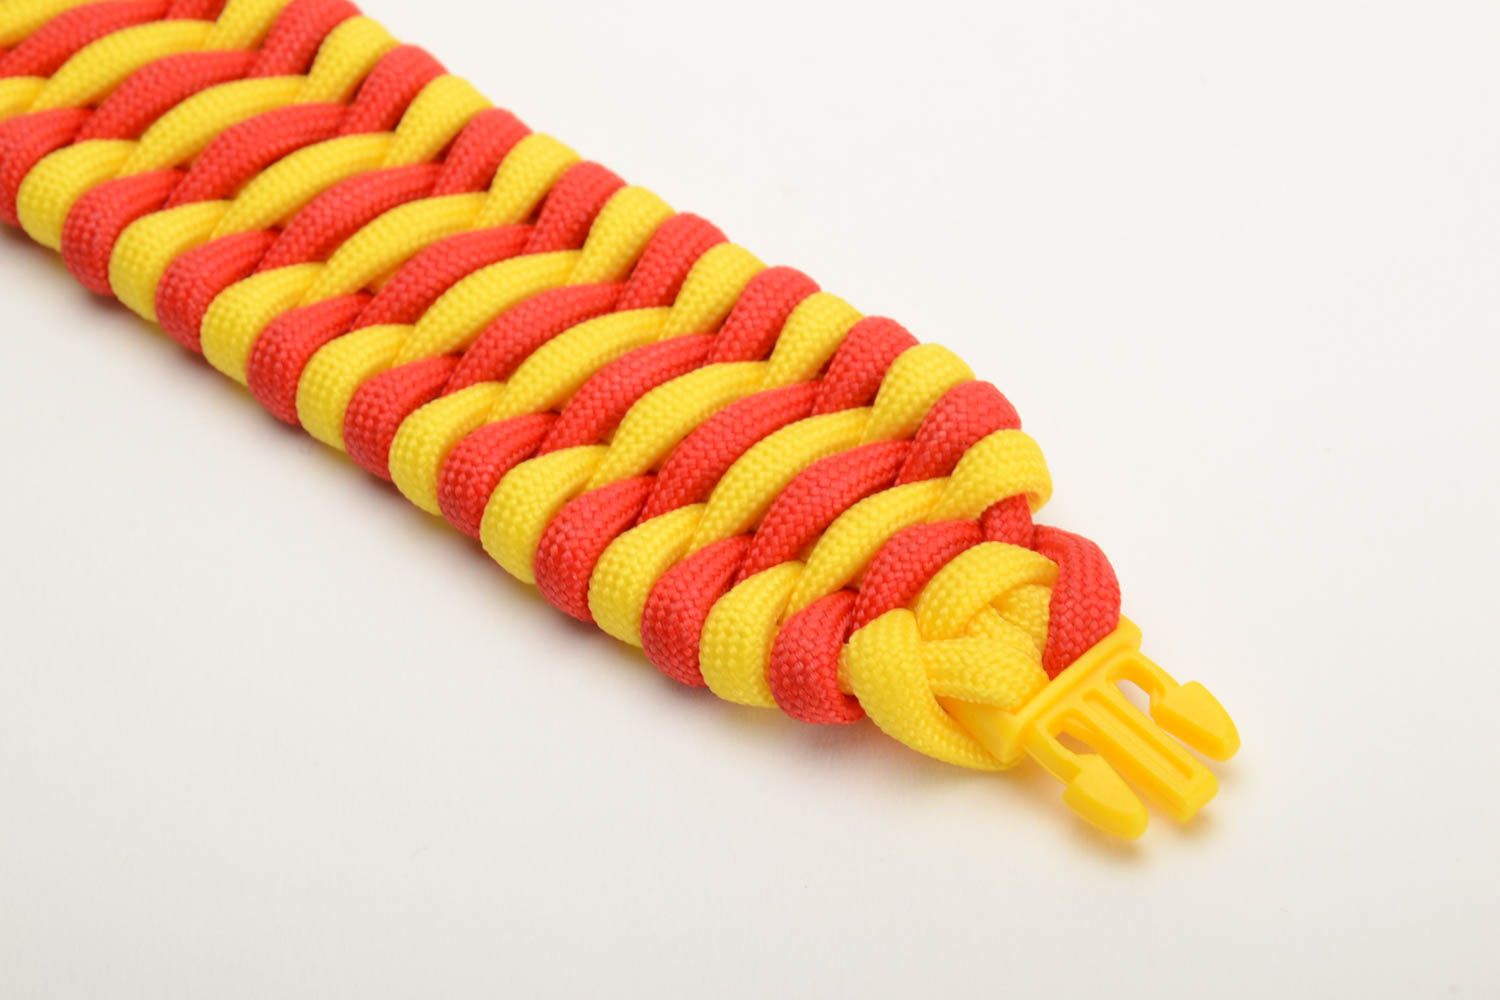 Handmade wide survival wrist bracelet woven of yellow and red paracords unisex photo 2